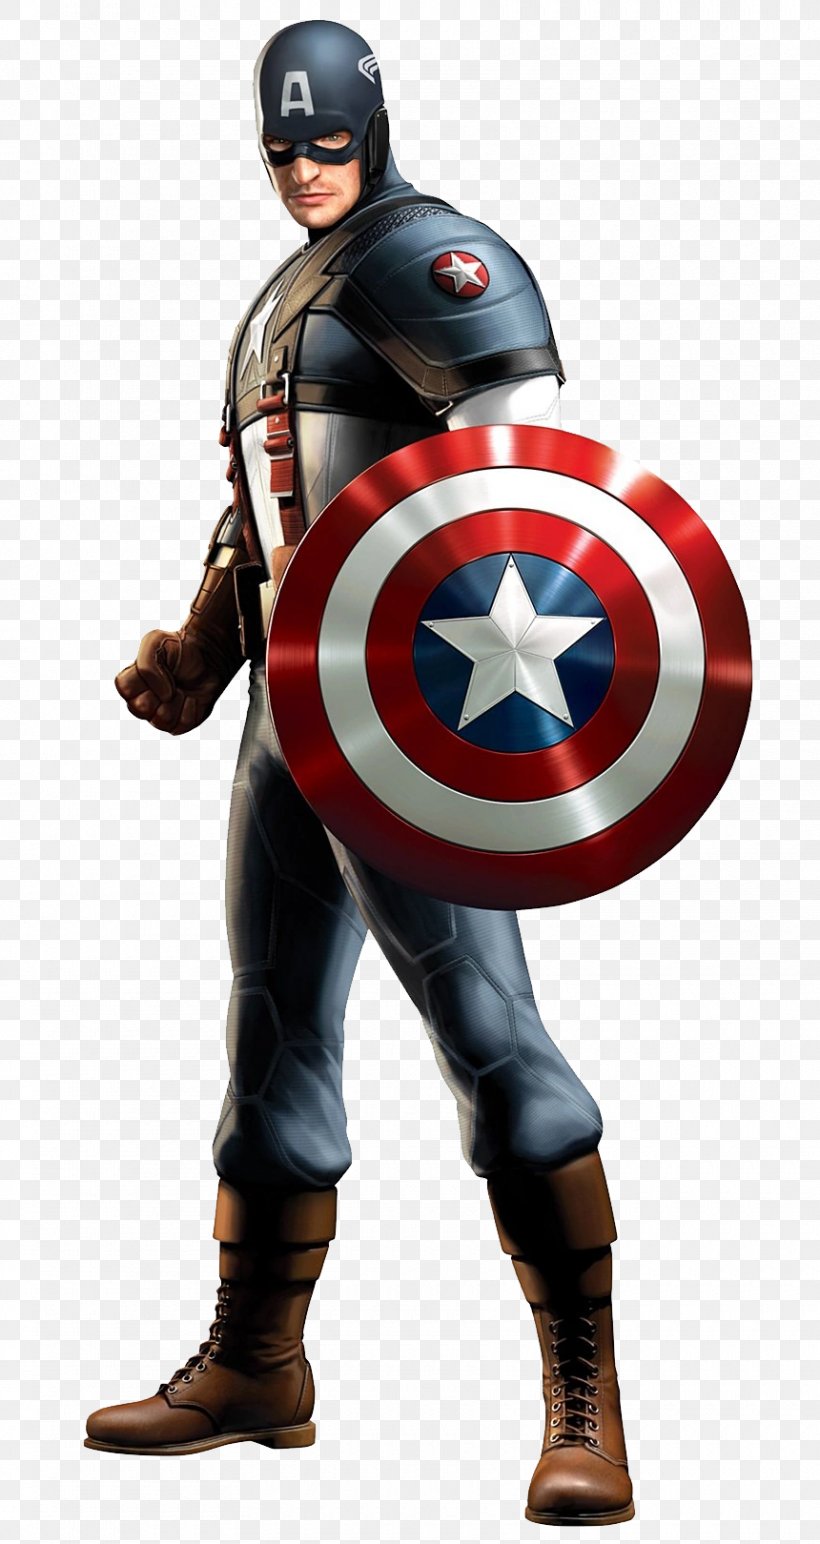 Captain America Iron Man Thor Marvel Cinematic Universe, PNG, 860x1620px, Captain America, Action Figure, Captain America Civil War, Captain America The First Avenger, Captain America The Winter Soldier Download Free